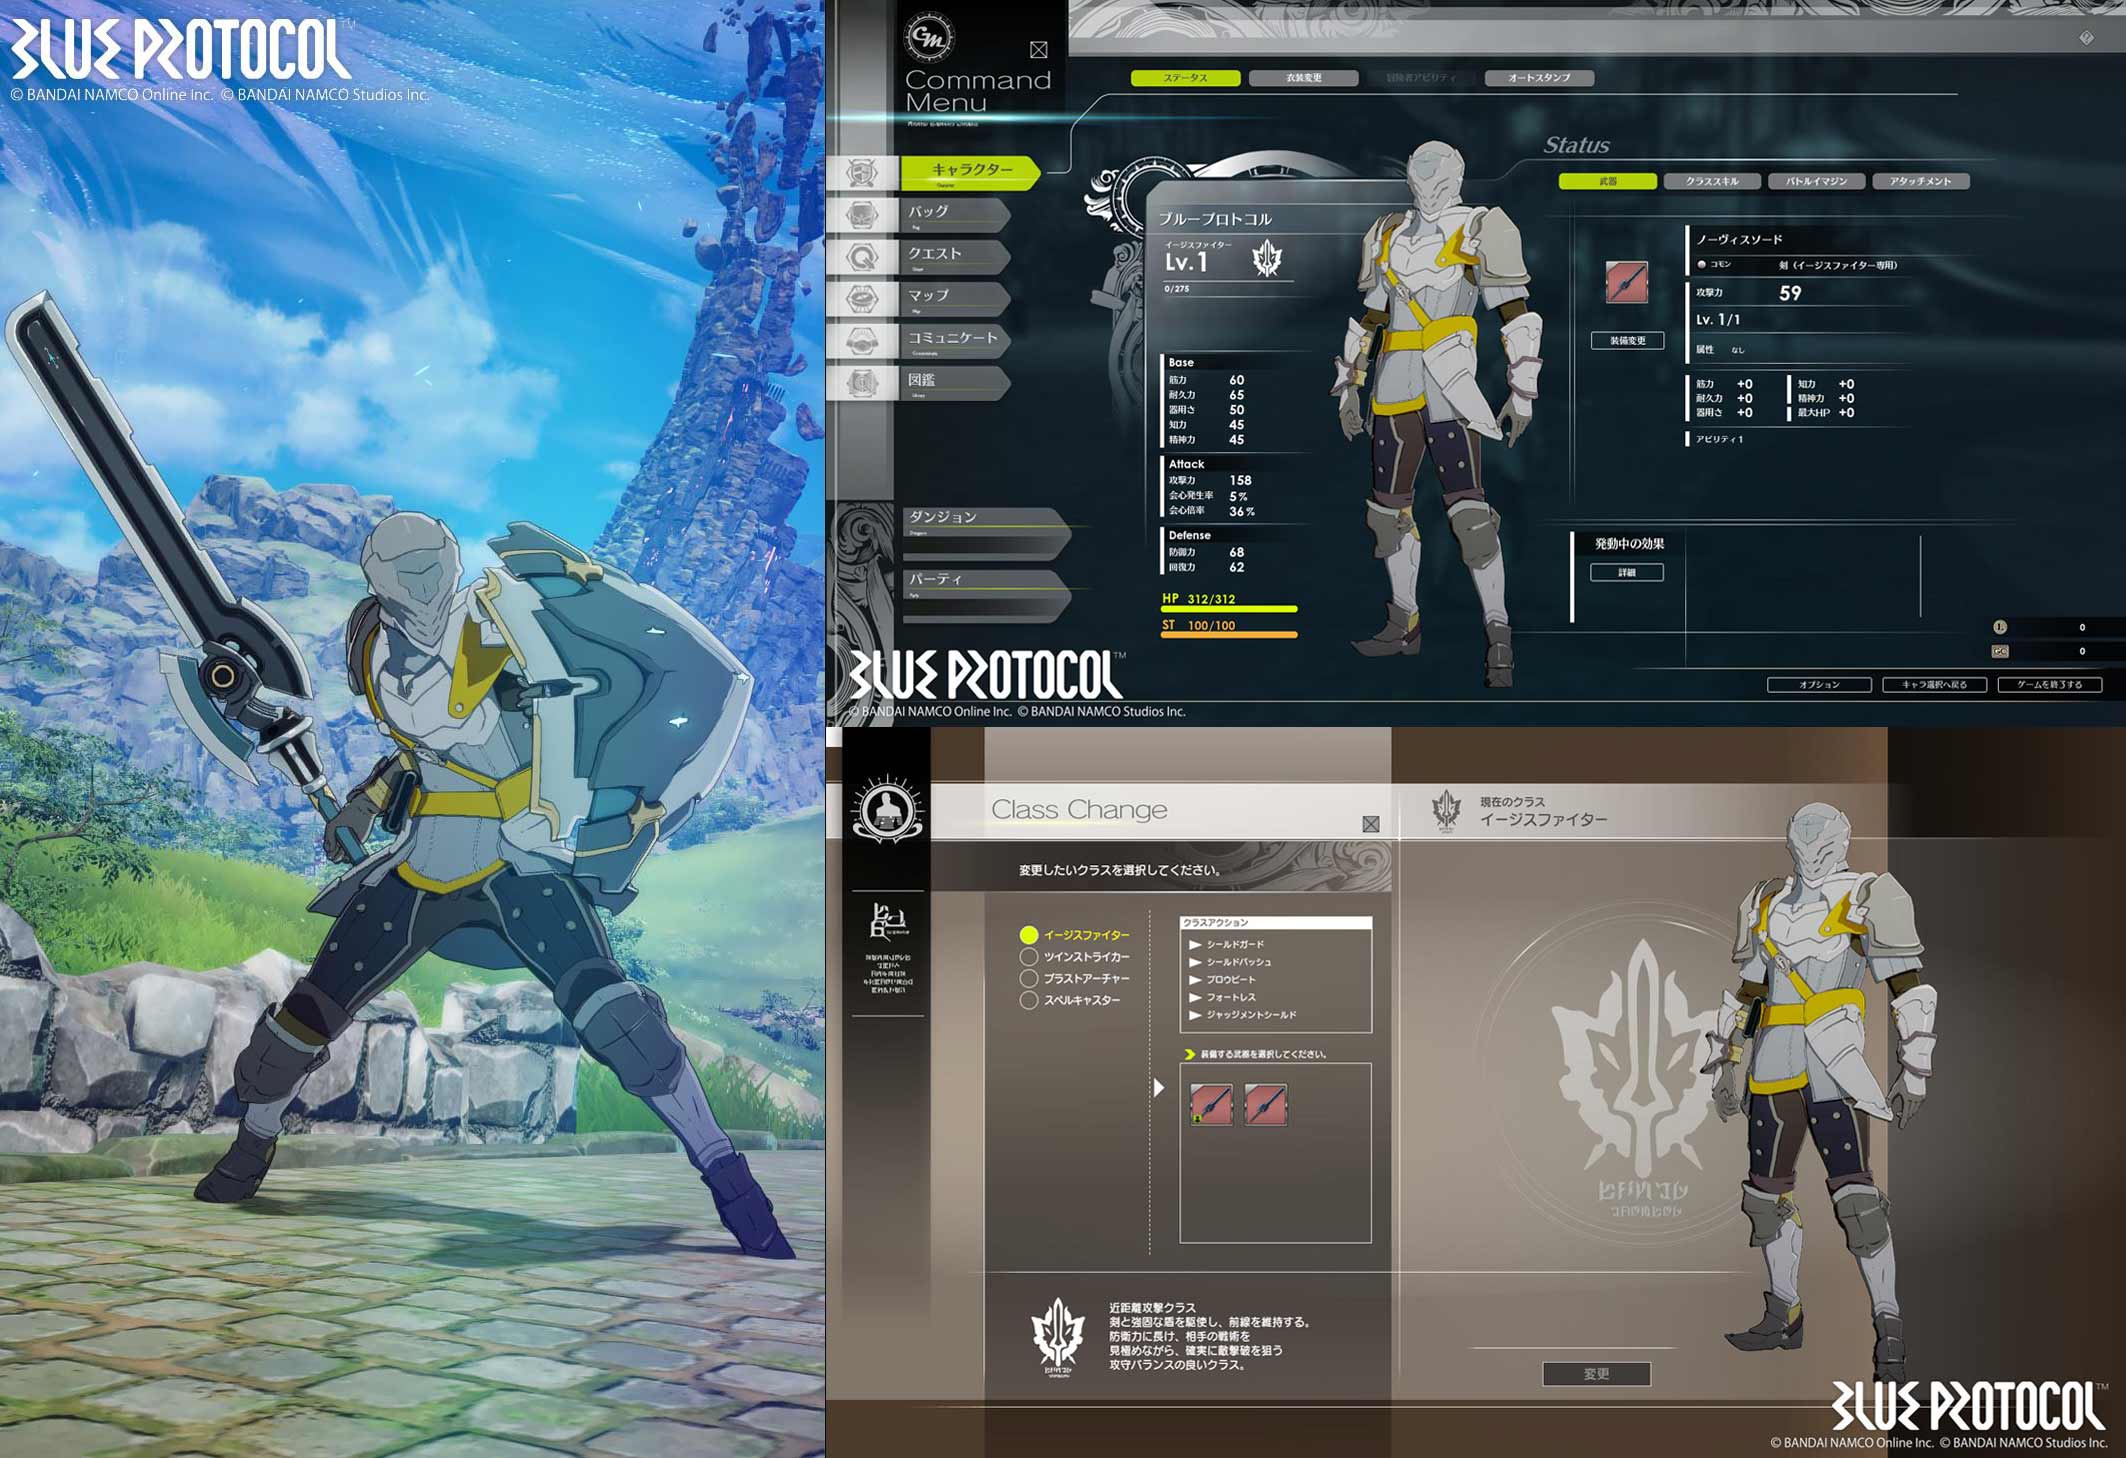 Blue Protocol Gameplay Footage Highlights Aegis Fighter, Twin Striker,  Blast Archer, and Spell Caster Classes - Siliconera